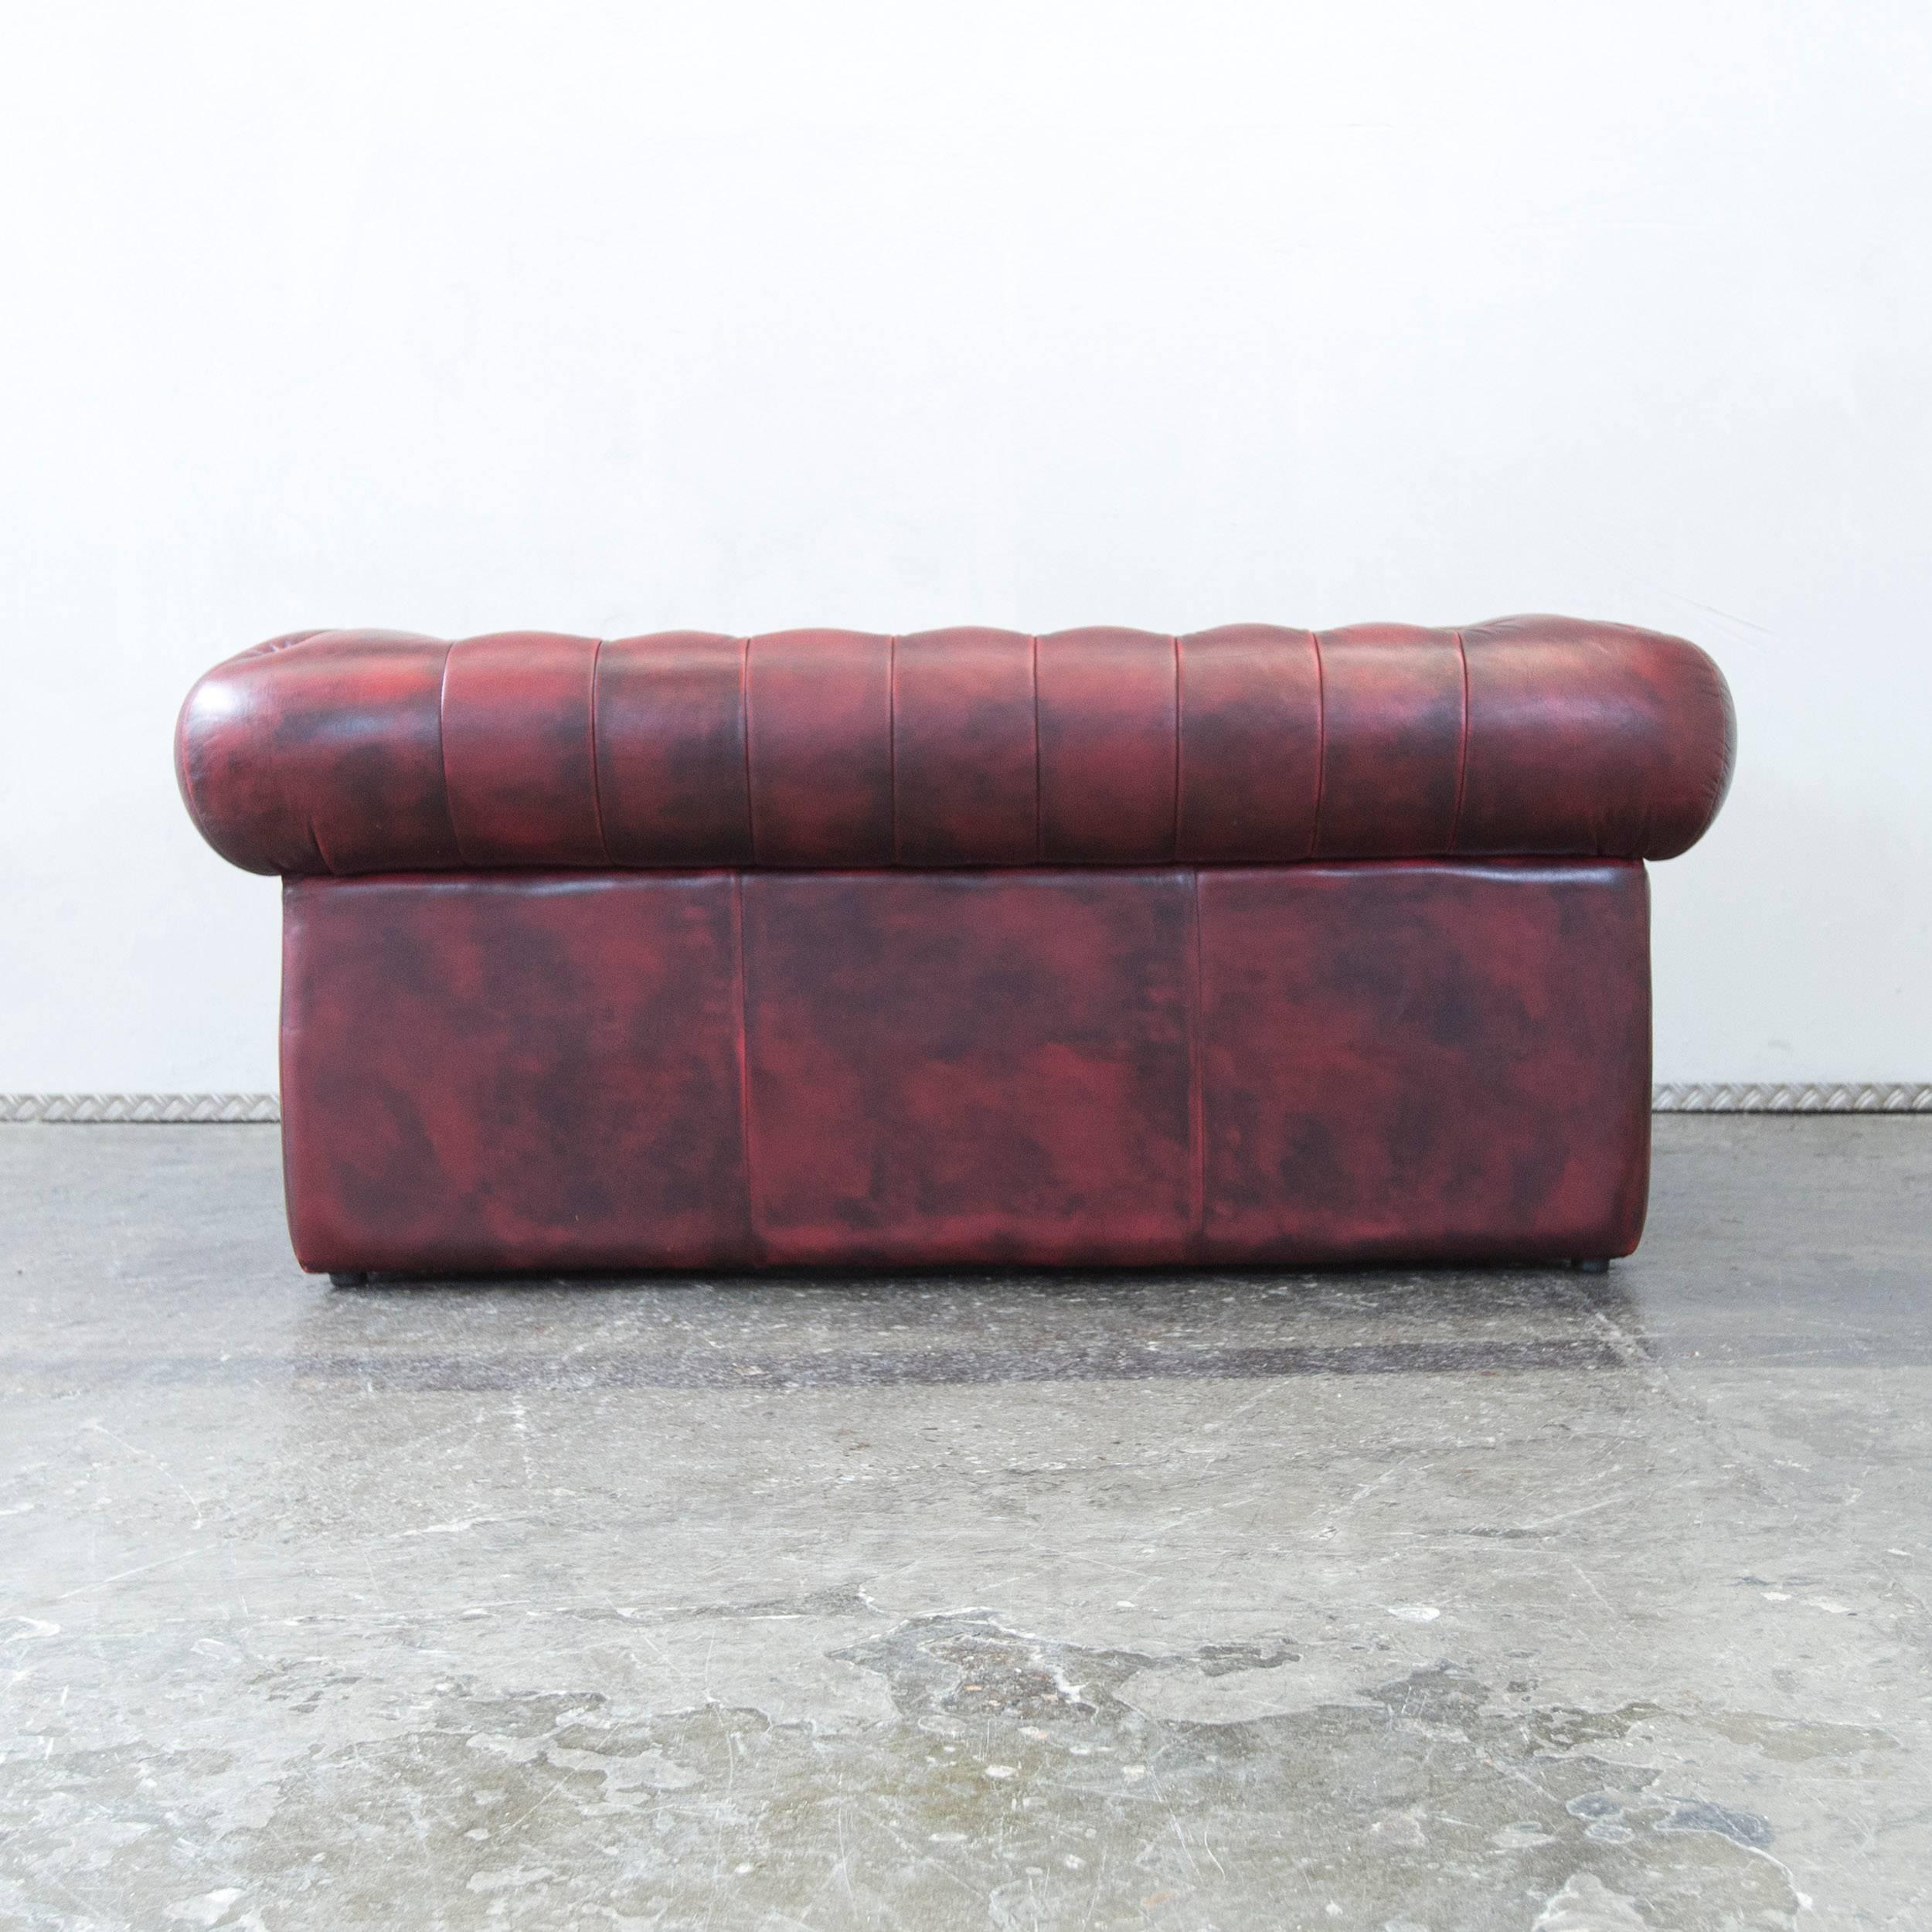 Chesterfield Designer Leather Sofa Red Two-Seat Couch Vintage Retro 2